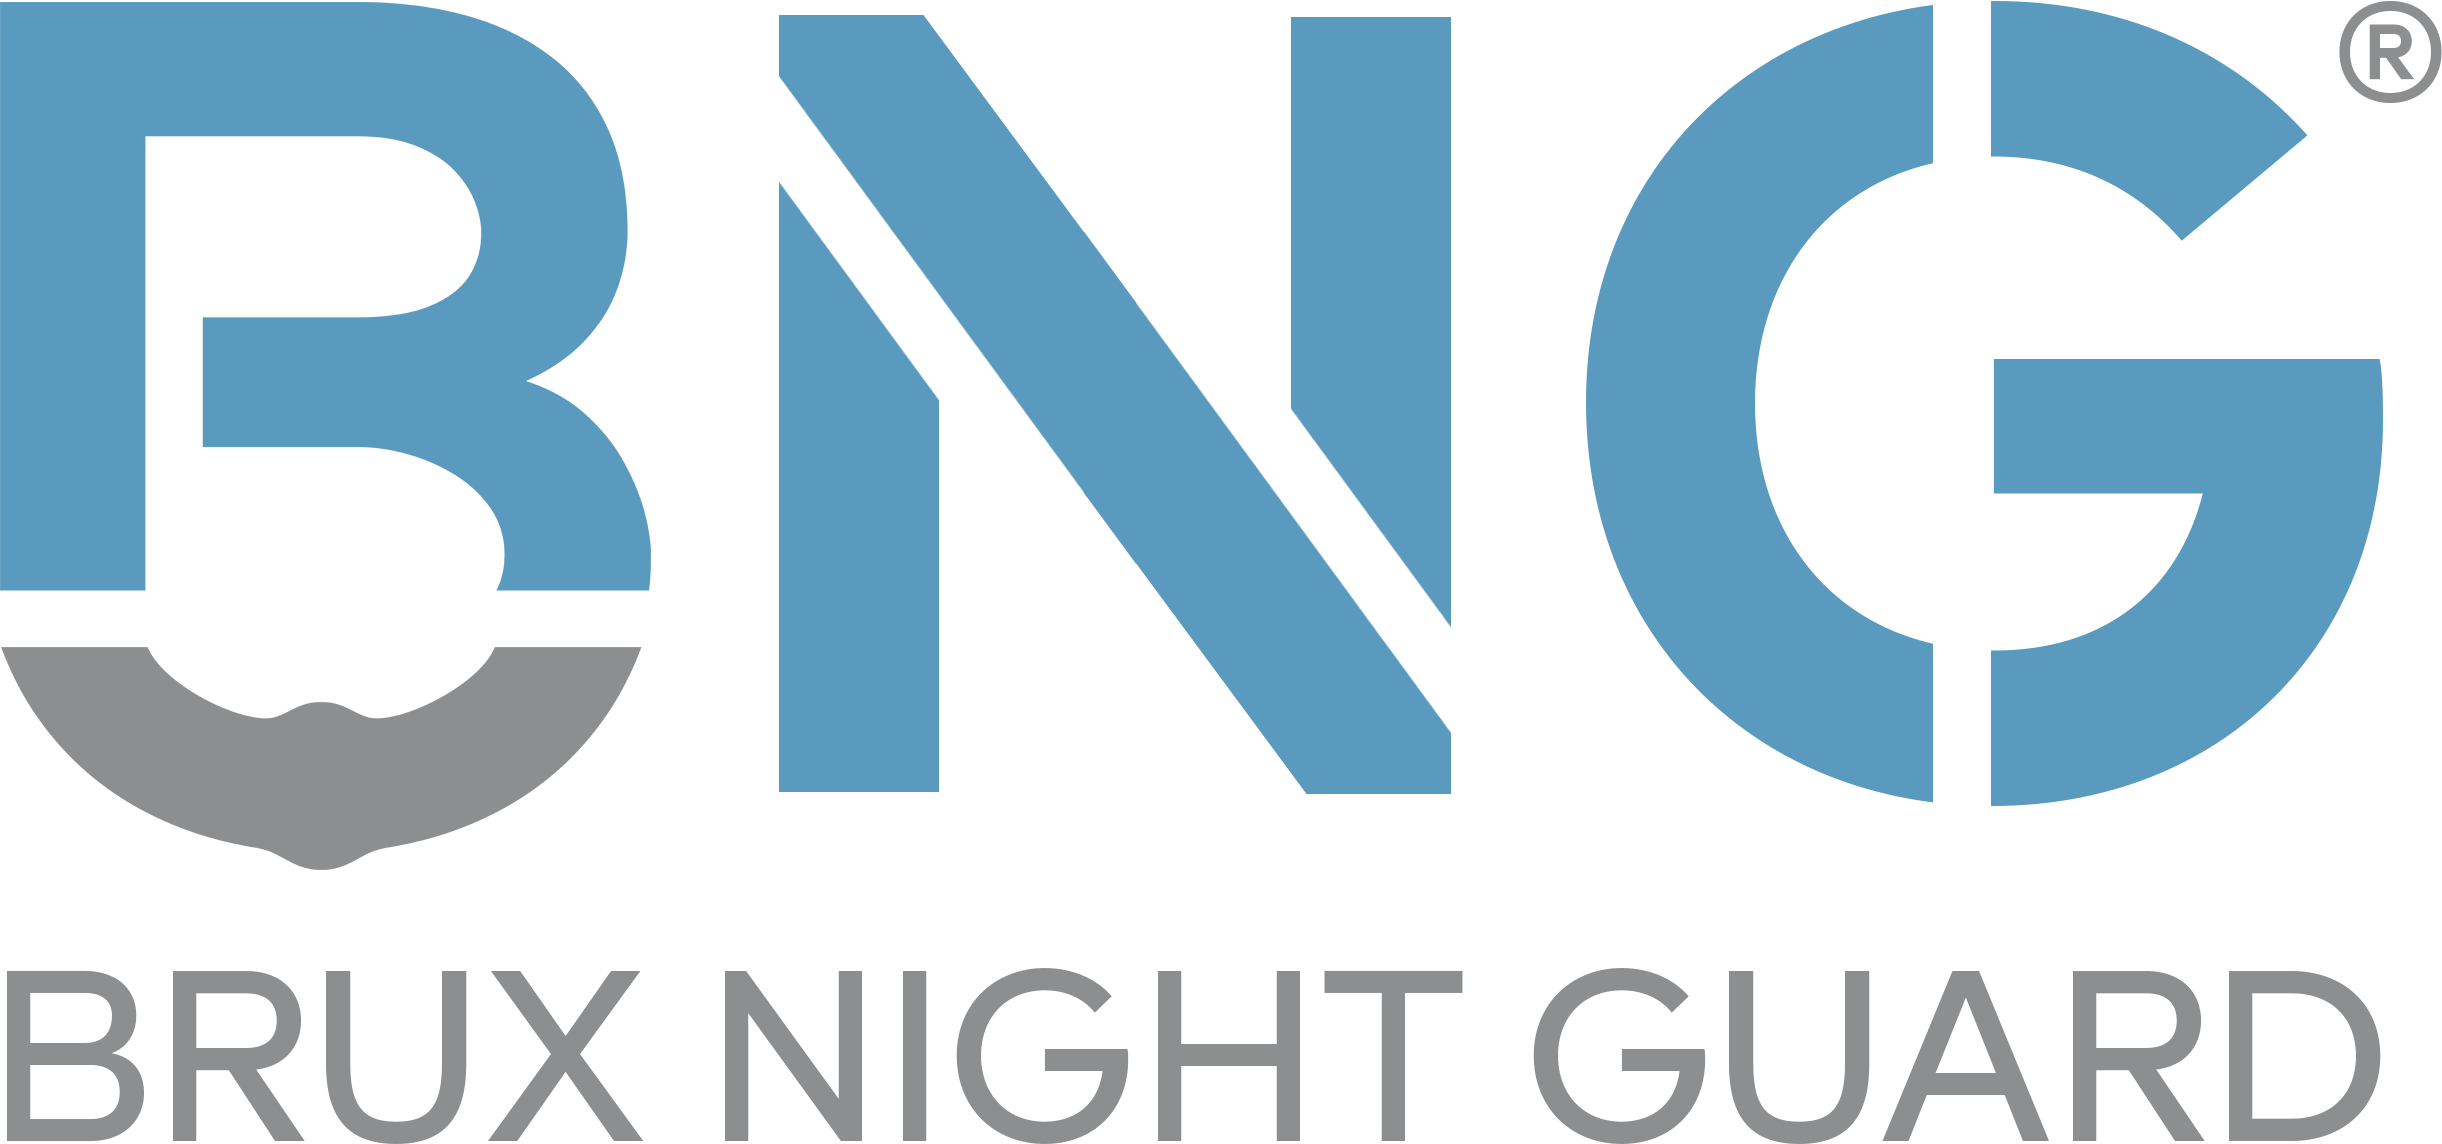 Brux Night Guard Launches Nationwide Television Campaign With ...